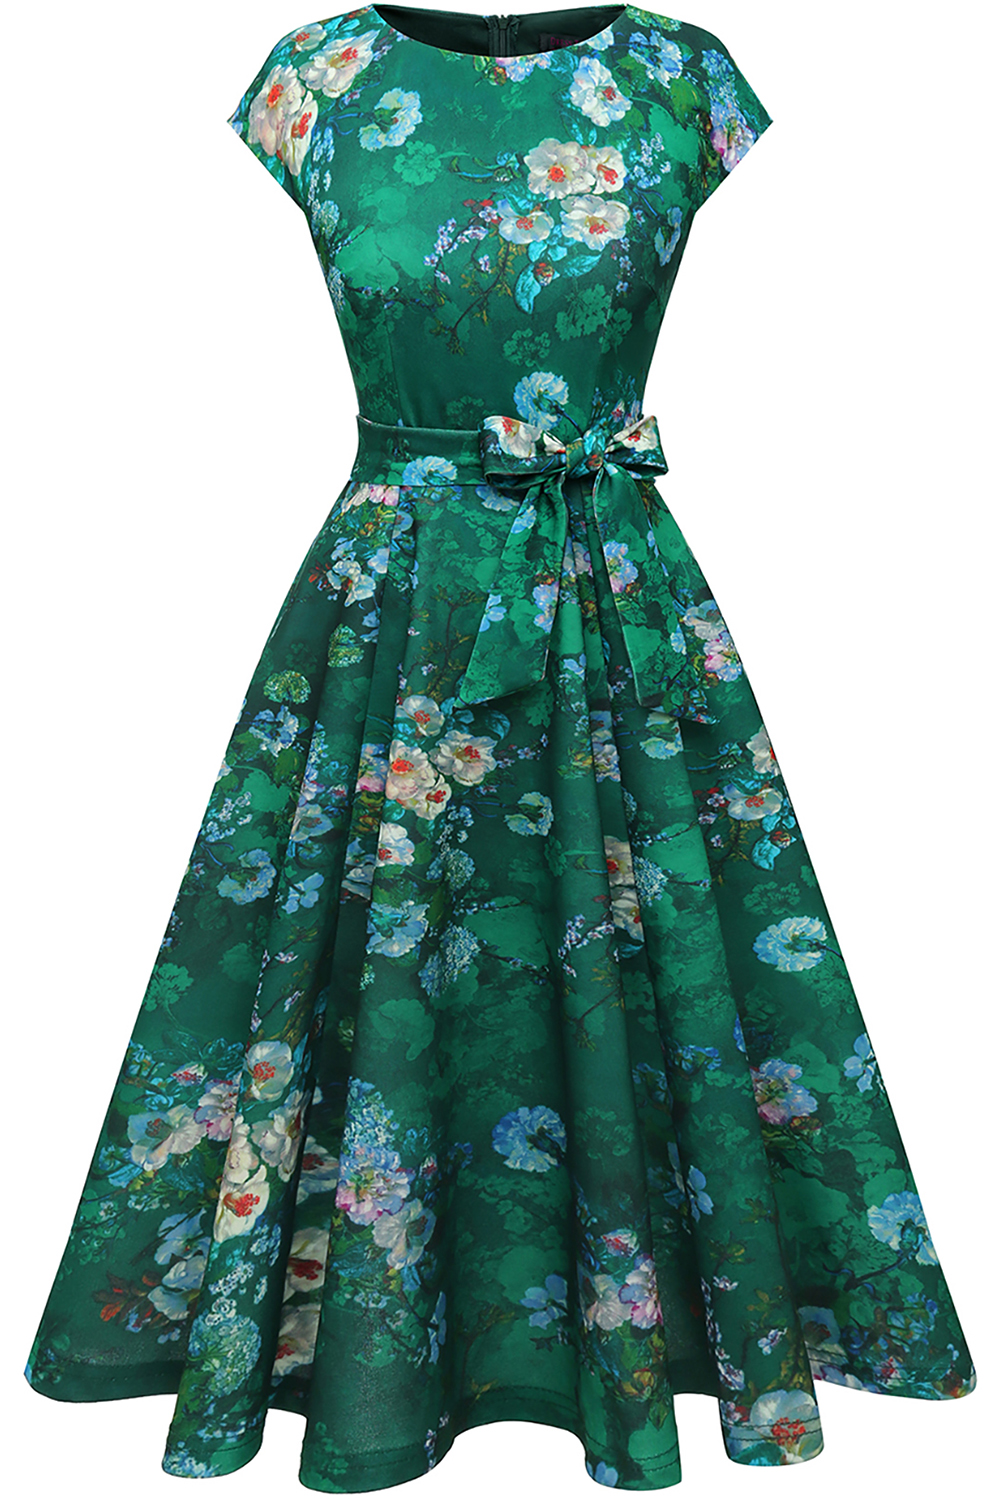 Green Flower 2024 Women's Floral Cocktail, Tea Length Wedding Guest Dresses - Vintage, Graduation, Prom & Bridesmaid with Cap Sleeves